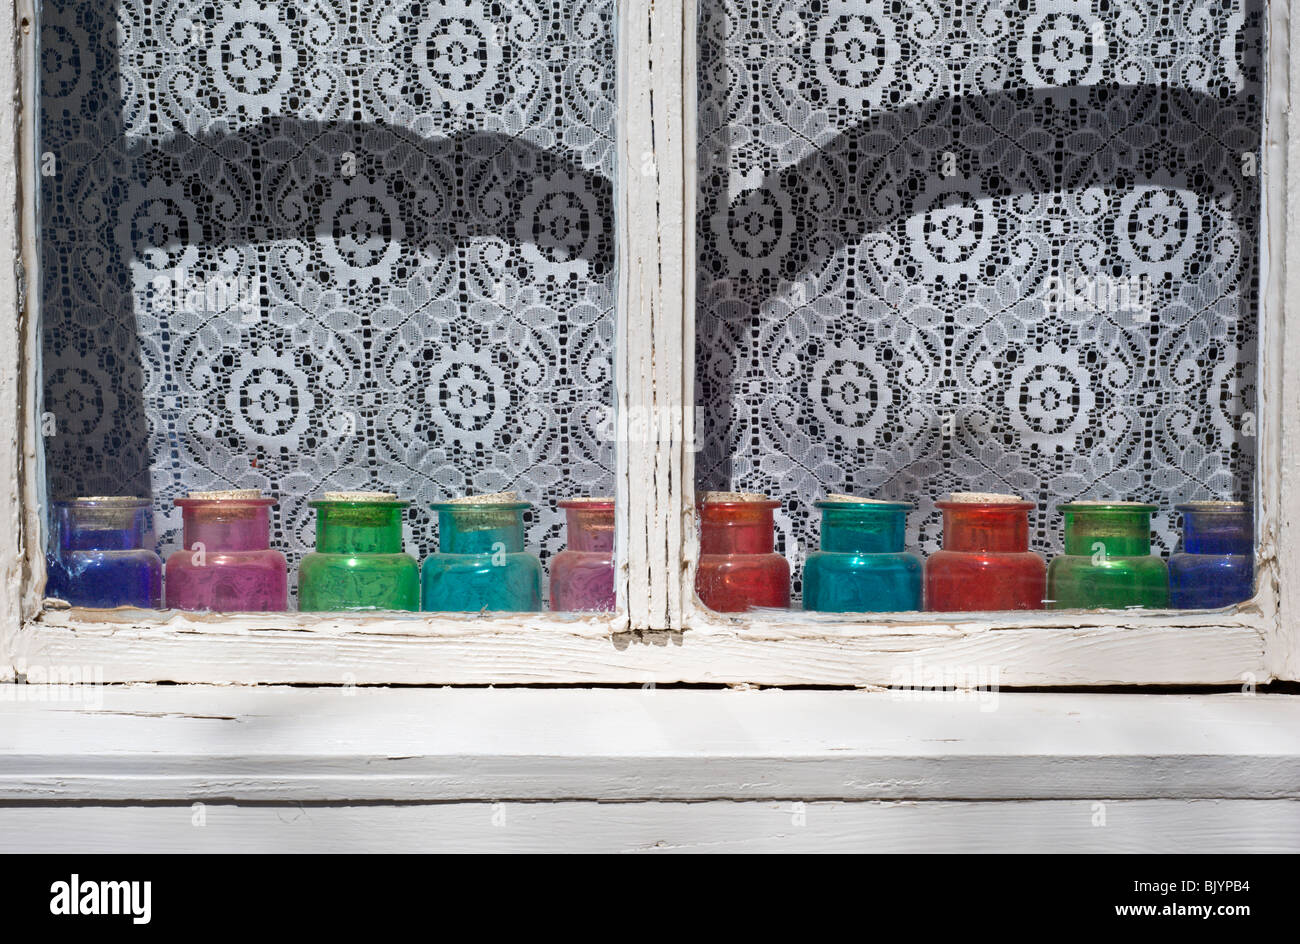 An old white-washed window, with lace curtains, has red, green and blue glass jars sitting on the sill, in Lincoln, New Mexico. Stock Photo